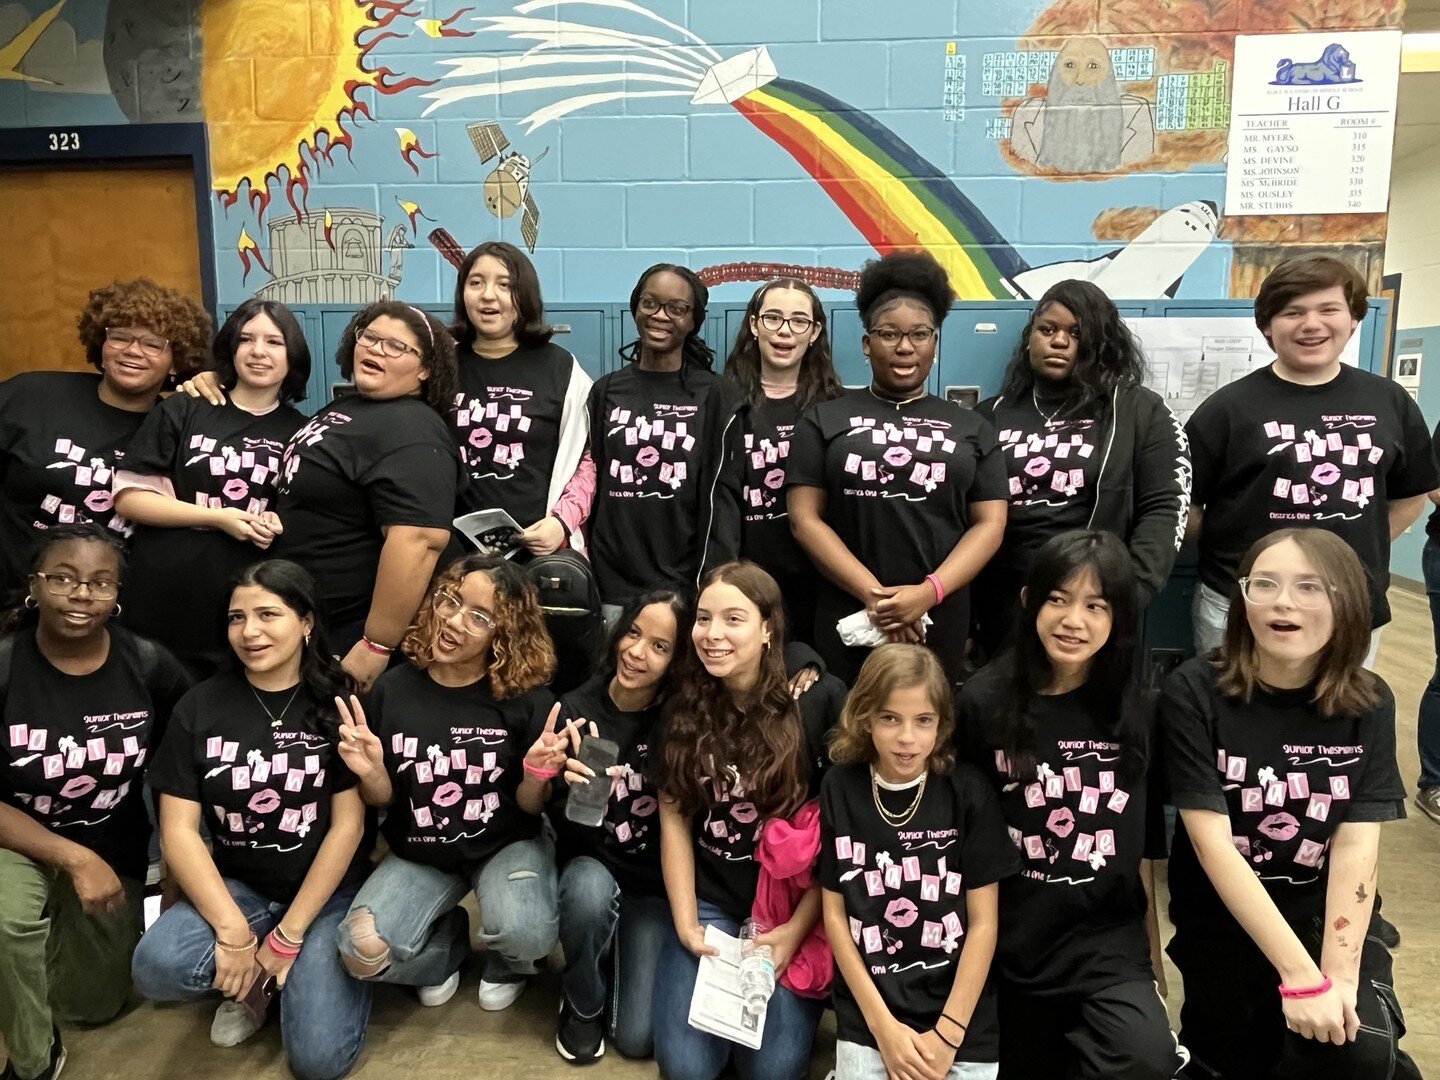 Last week our GOCA JR Thespian Troupe 10326 took 17 students to present 26 entries resulting in 20 ranking ls of Excellent, 3 Superiors and 2 Top Honors in Make Up Design (Sara Agolli) and Publicity Design (Brielle Morgan)!